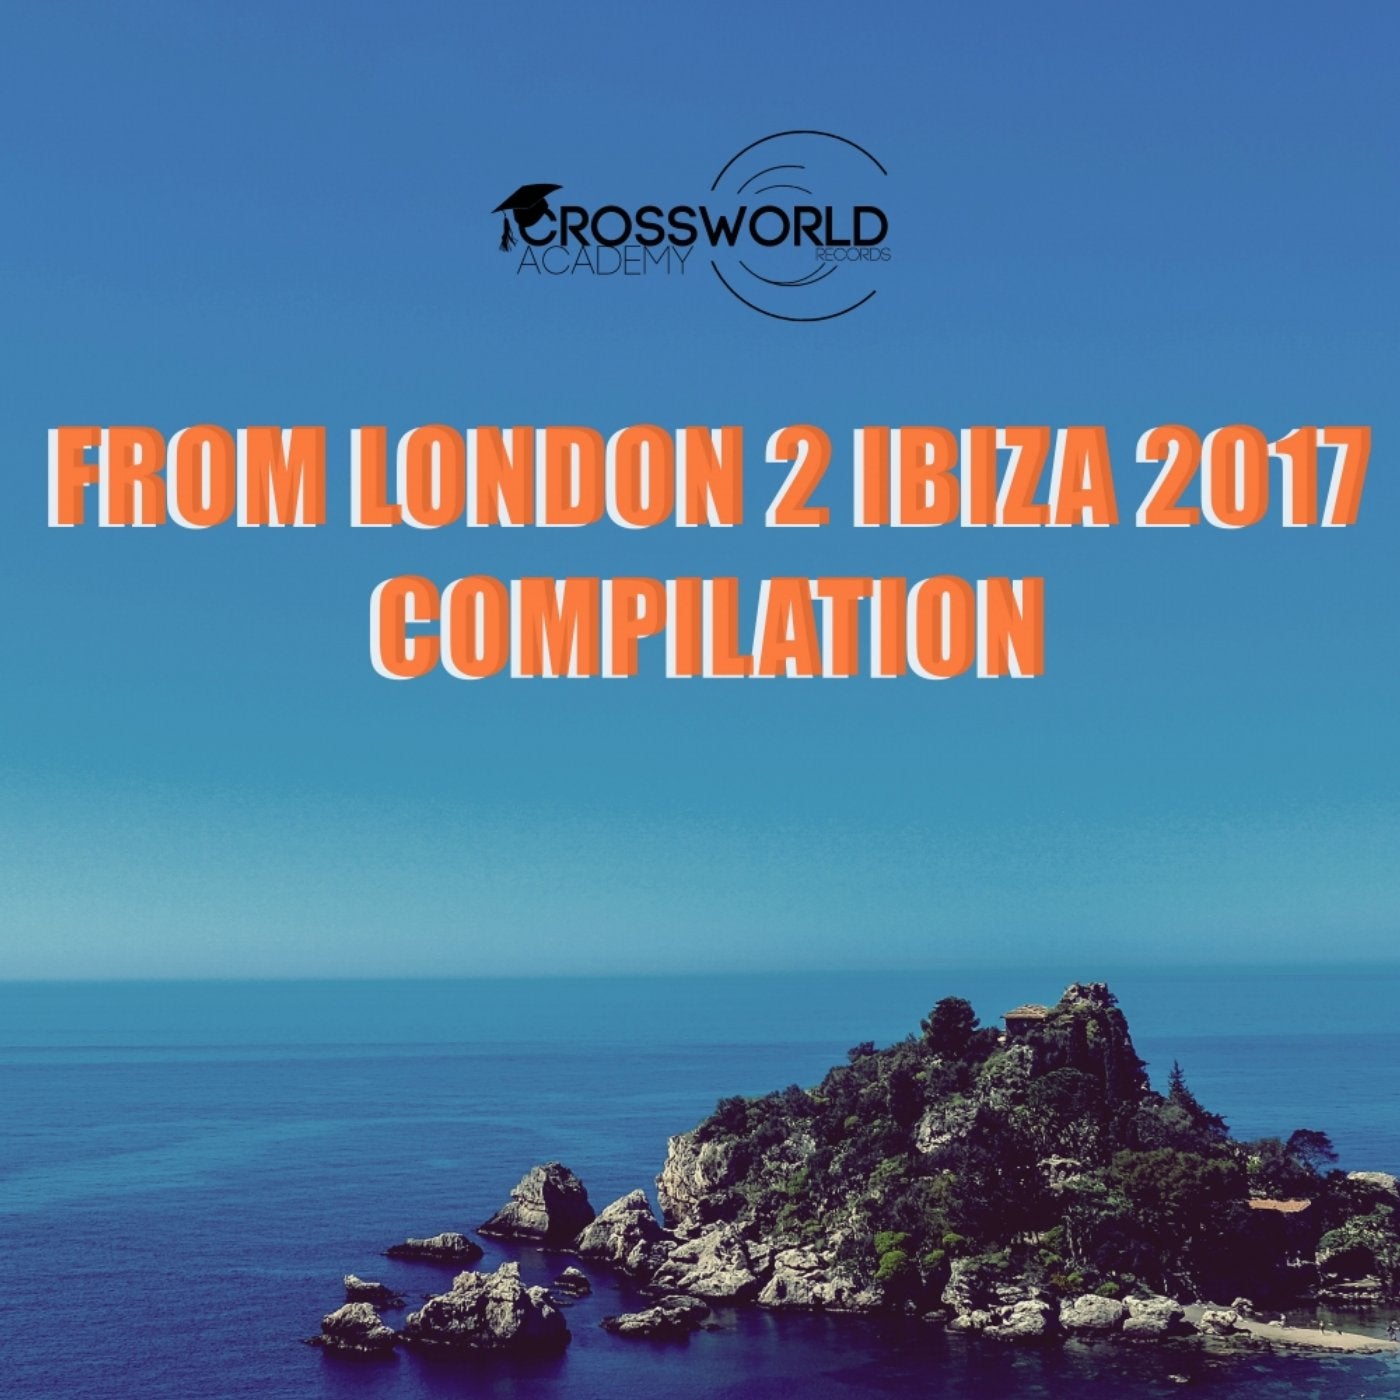 From London 2 Ibiza 2017 Compilation